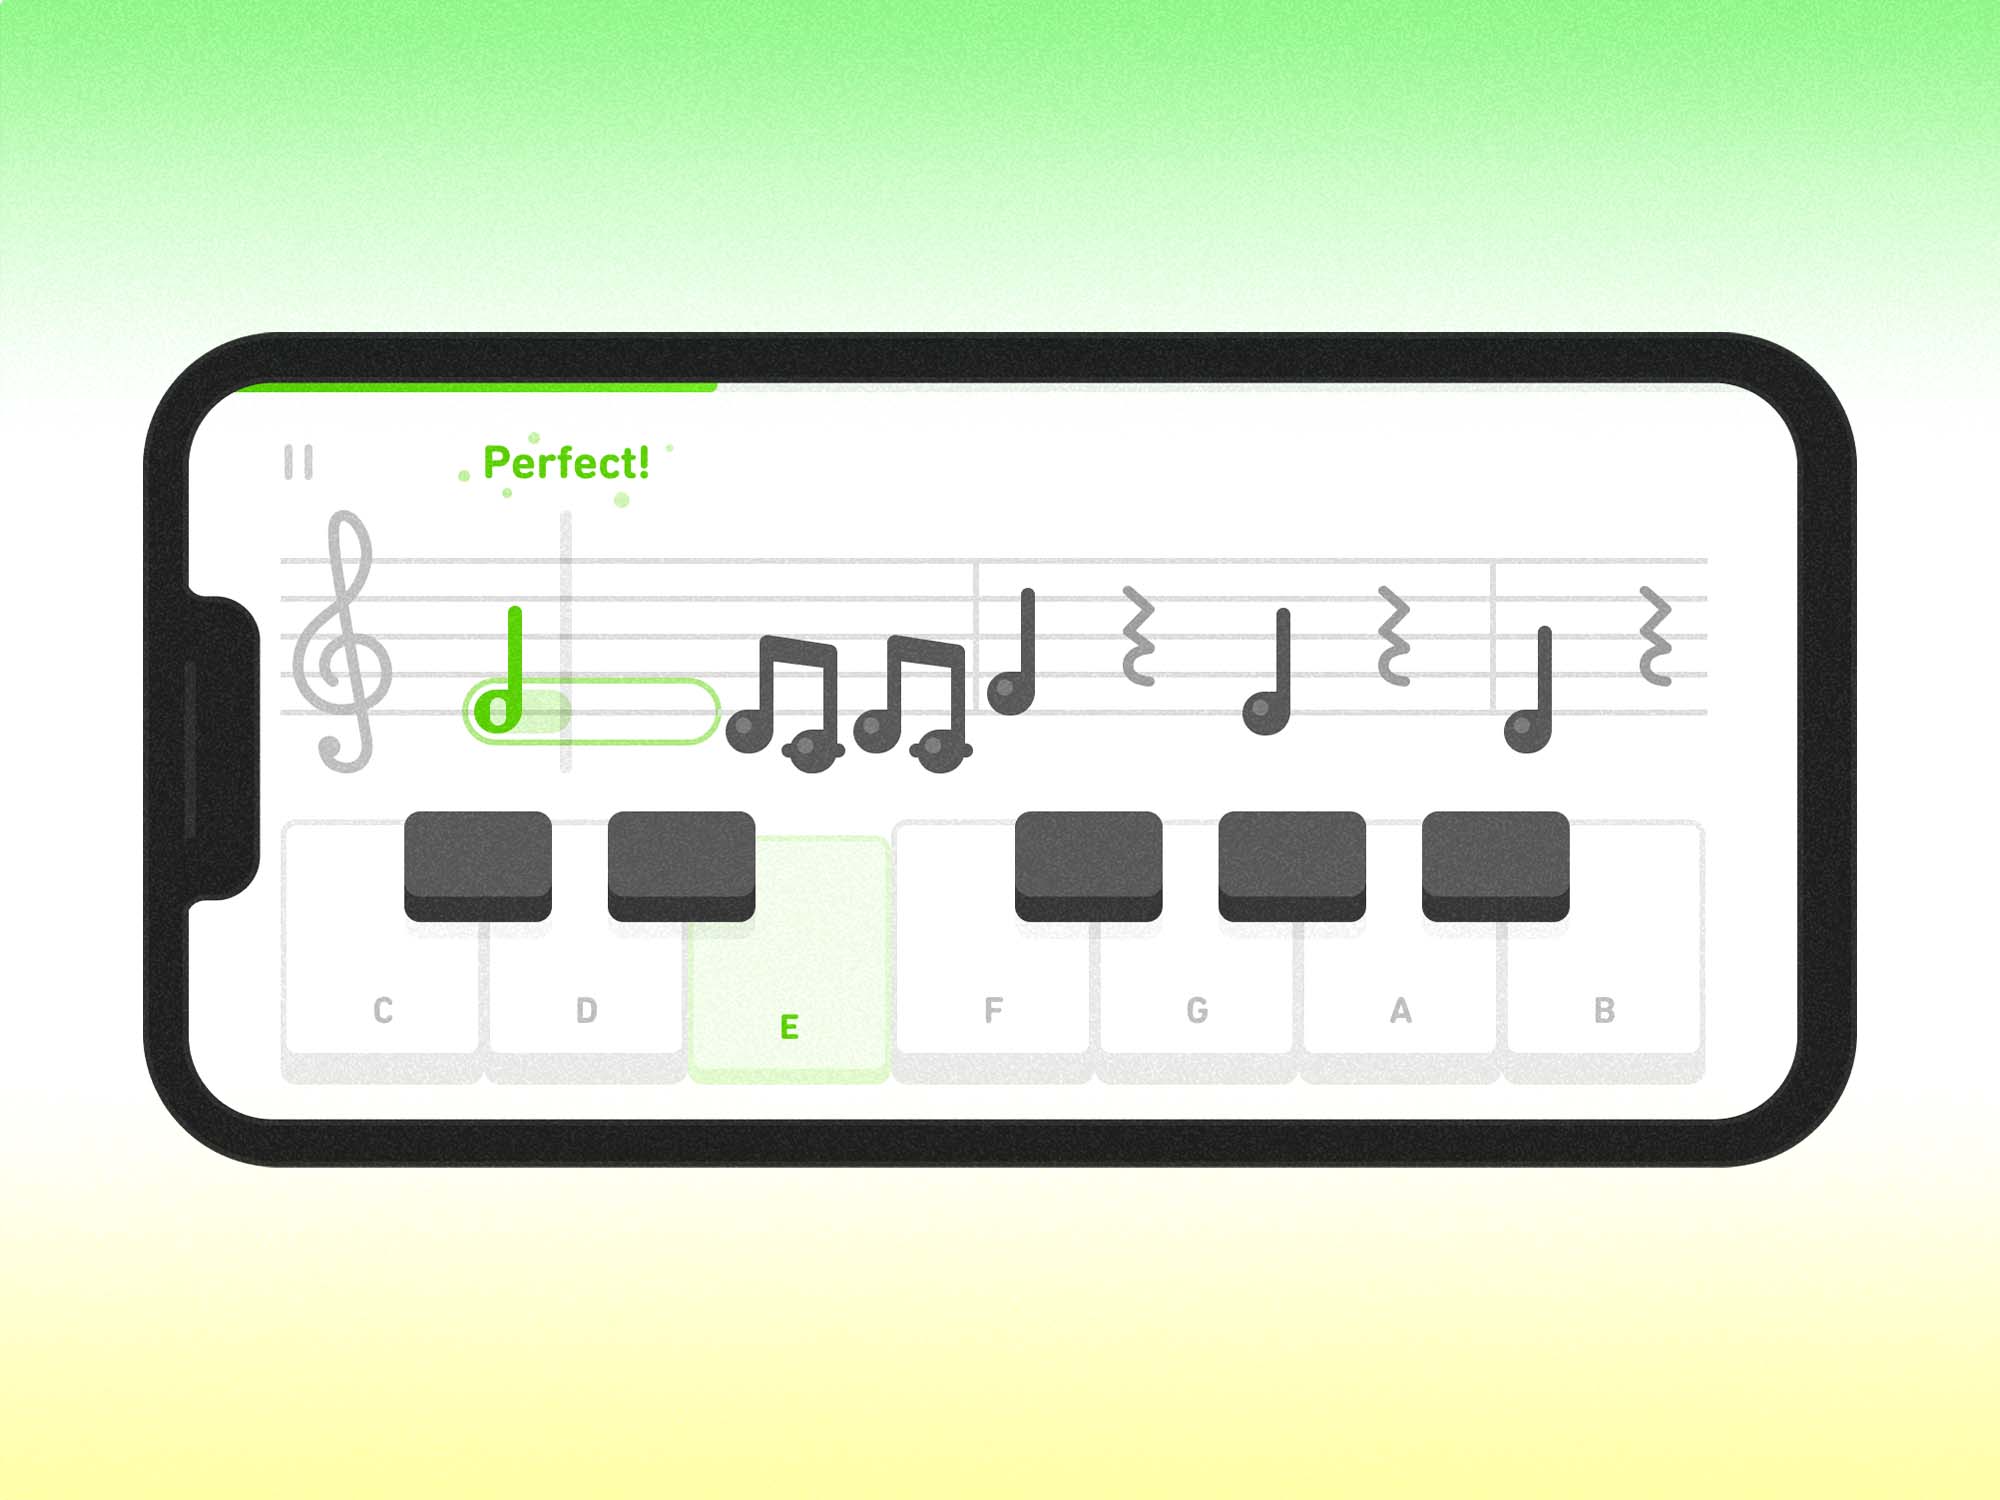 DuoLingo music learning tool on a mobile phone. It shows notes and piano keys.